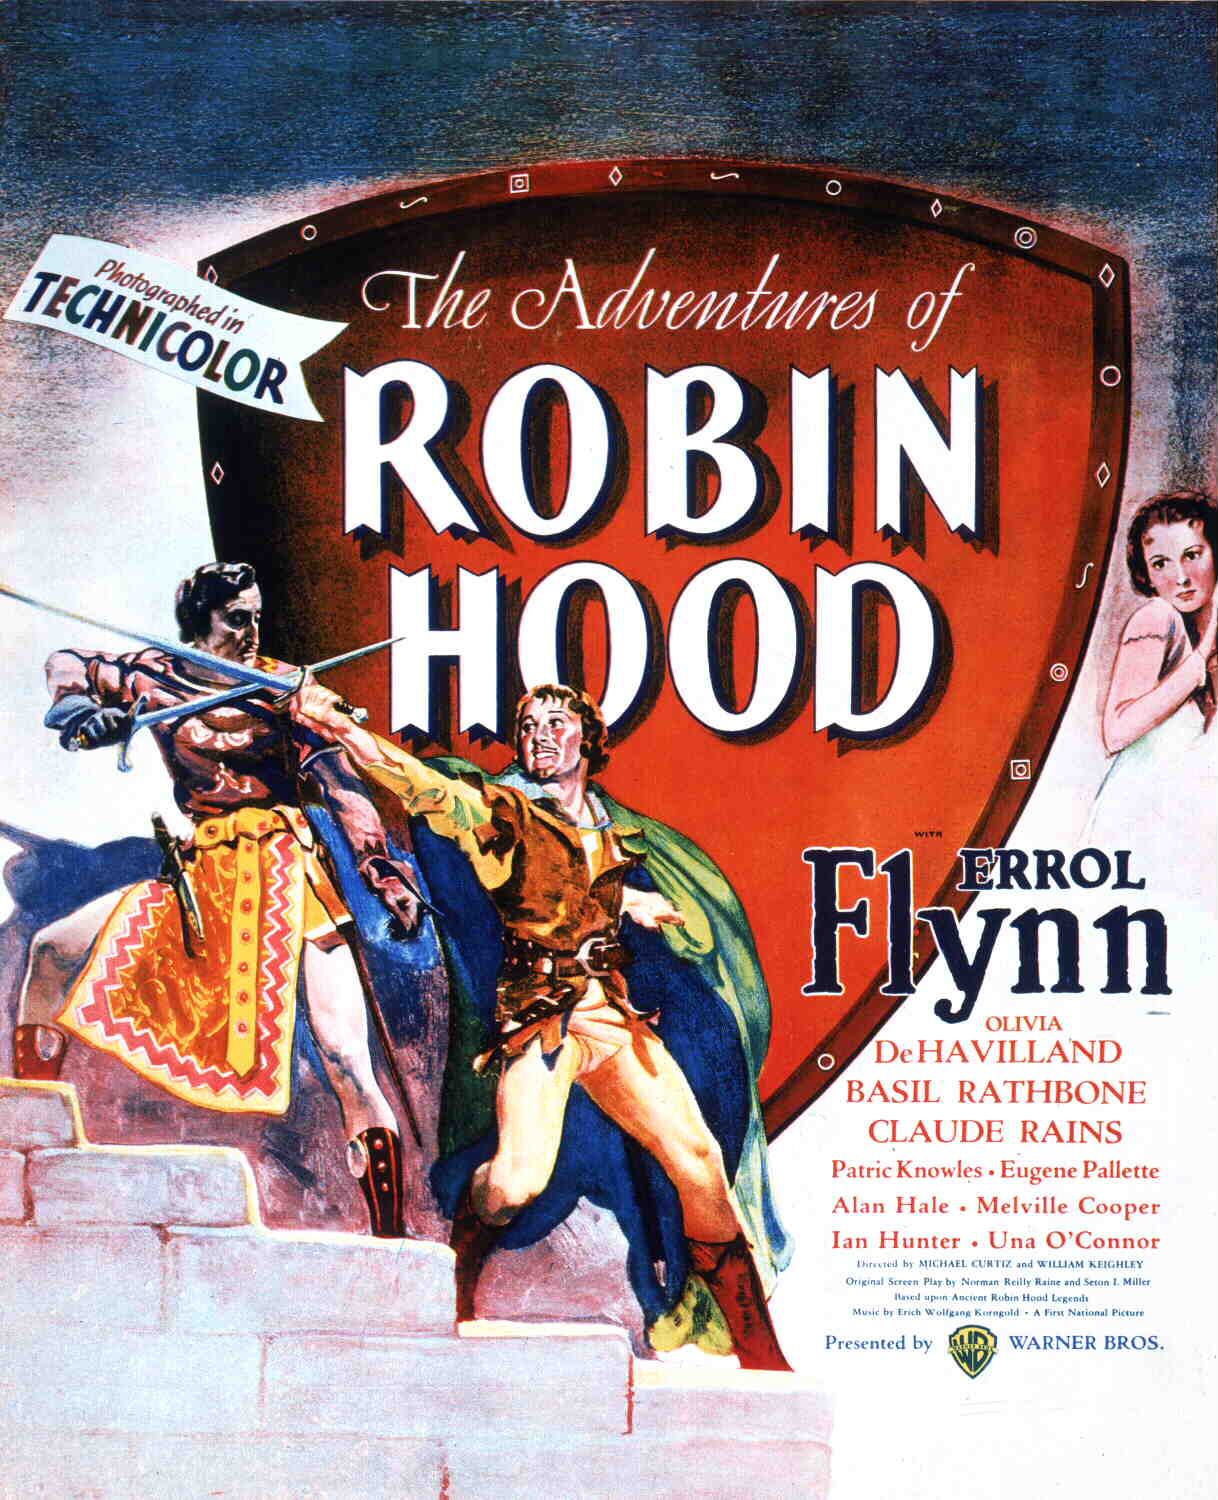 TCM's The Adventures of Robin Hood page: